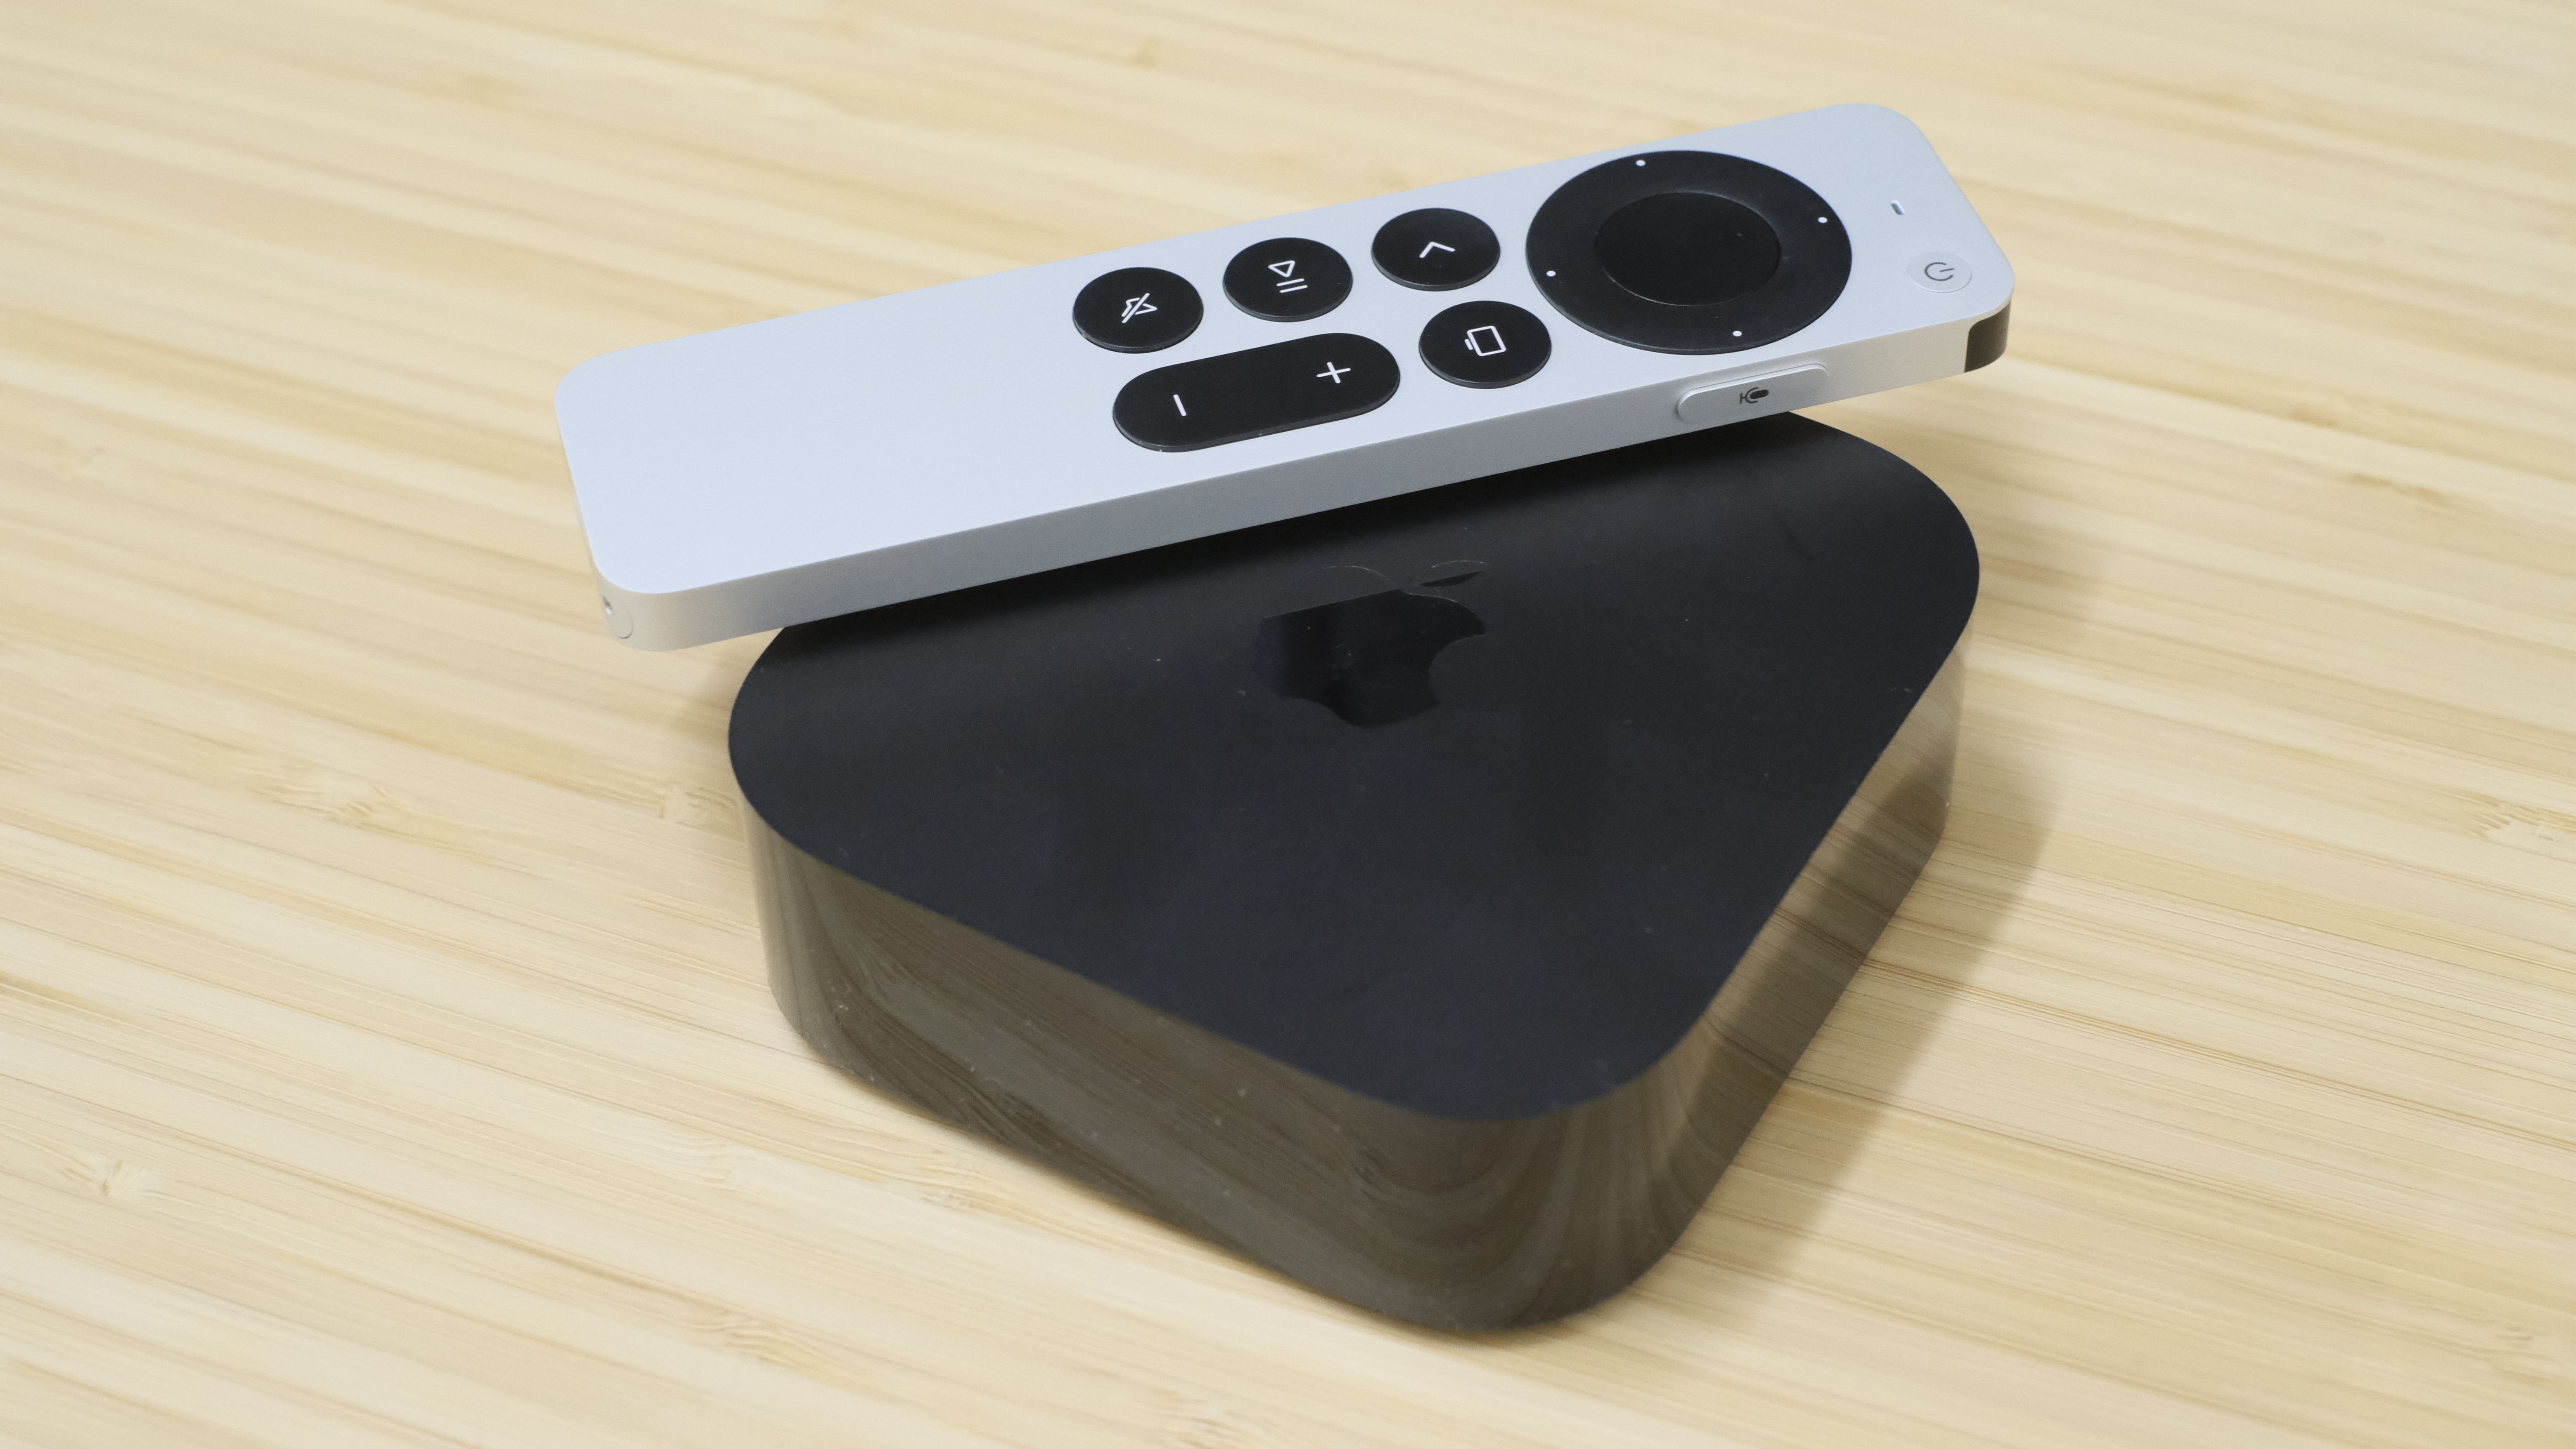 10 secret Fire TV tips only the pros know